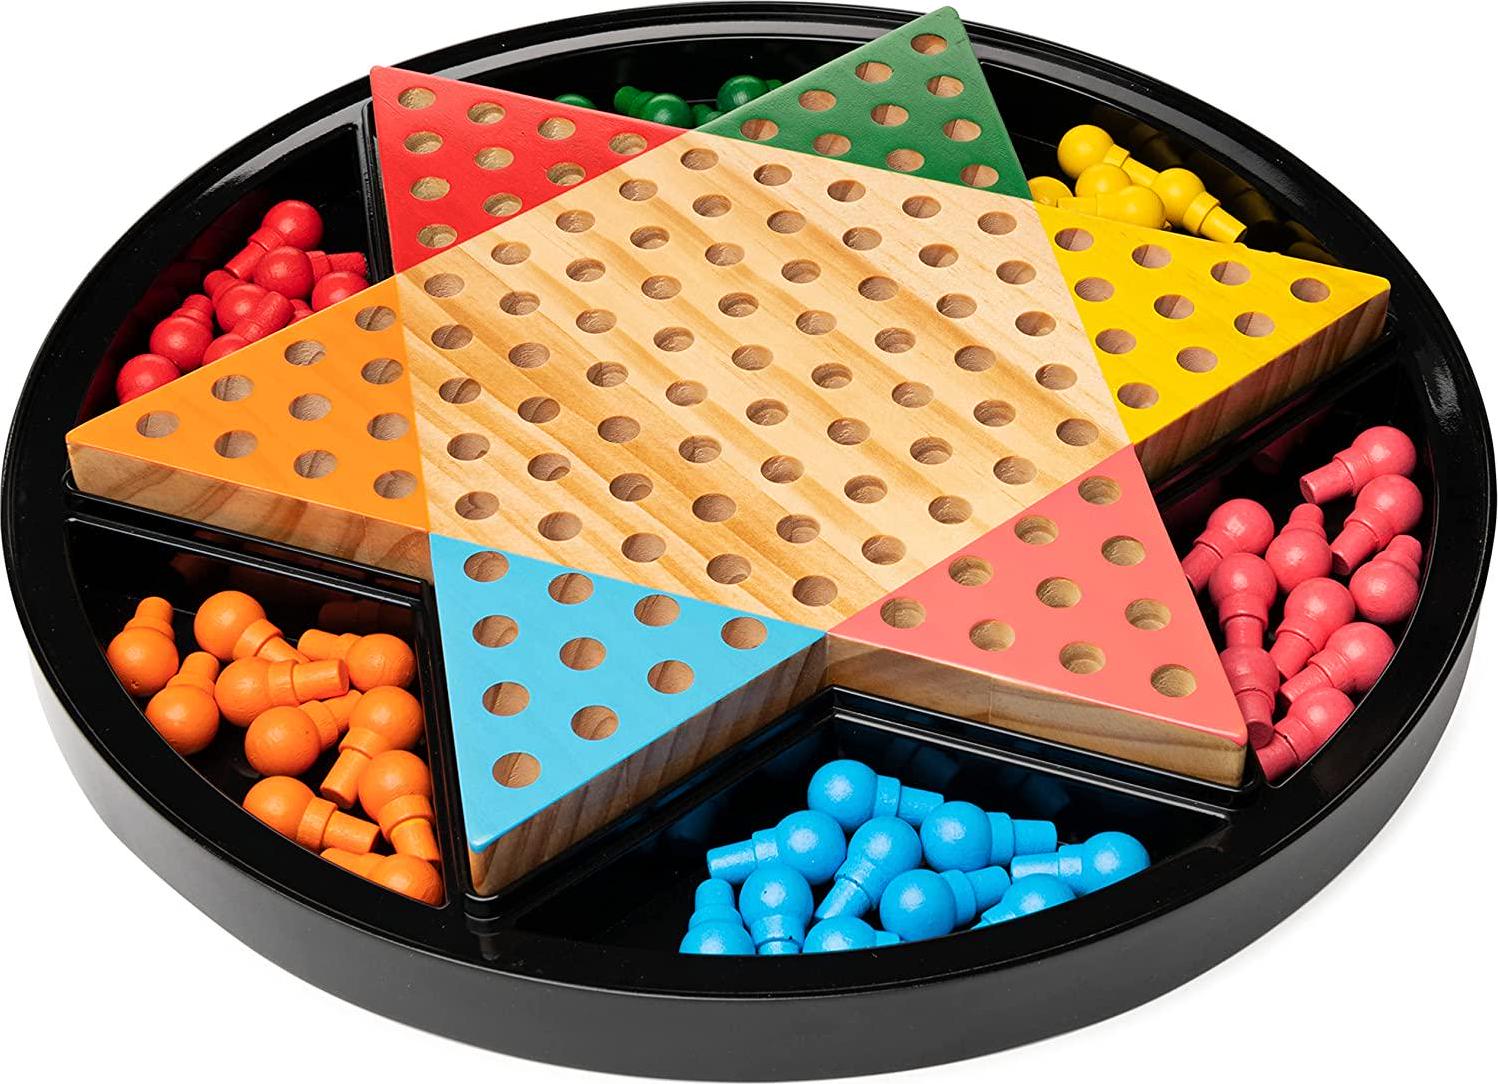 Cardinal, Legacy Classics Deluxe Chinese Checkers